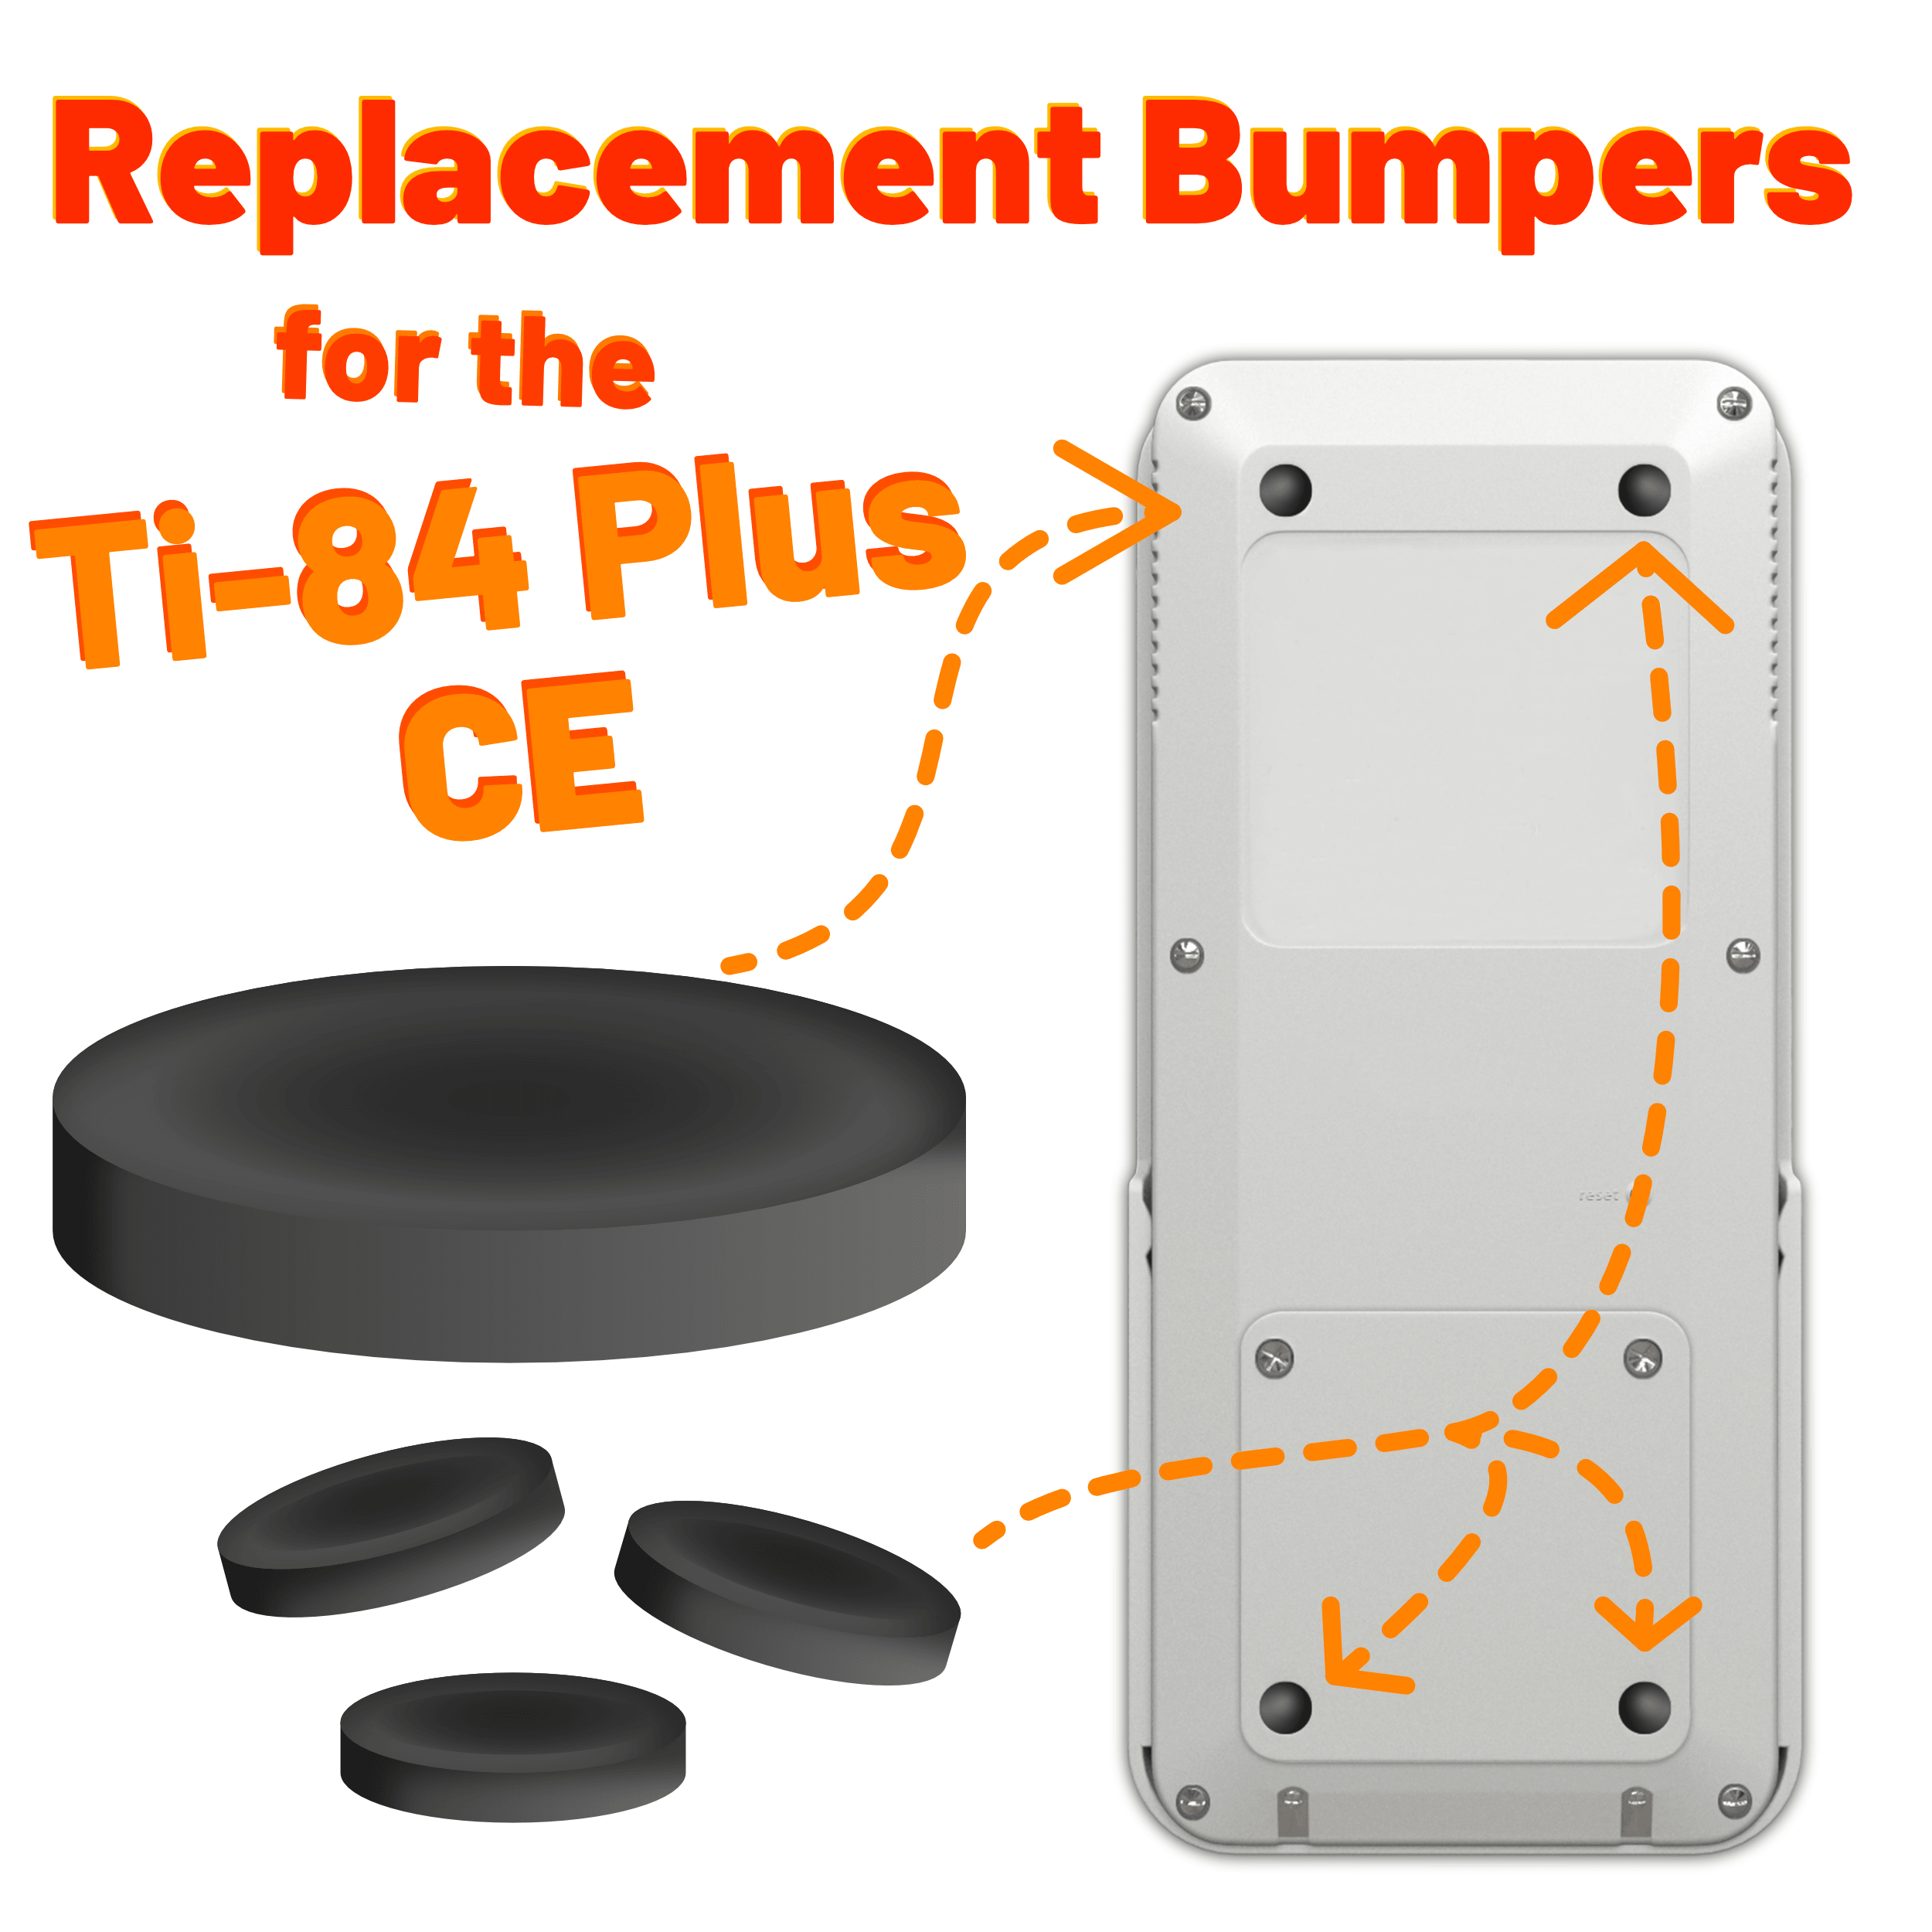 Replacement Bumpers for the Ti-84 Plus CE Graphing Calculator - Underwood Distributing Co.